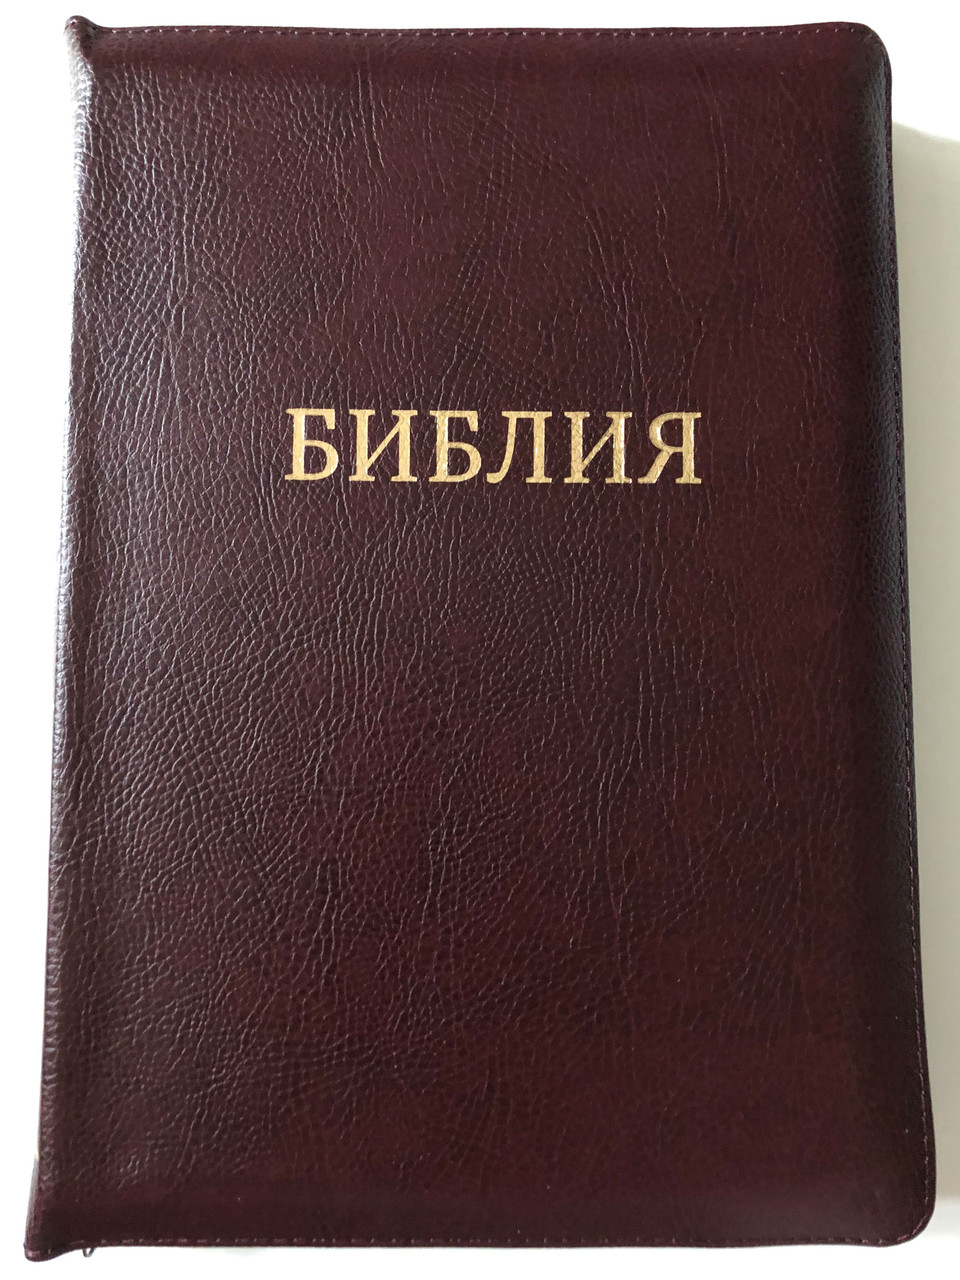 https://cdn10.bigcommerce.com/s-62bdpkt7pb/products/51571/images/262644/Brown_leather_bound_Large_Russian_Holy_Bible_1__48511.1672345291.1280.1280.JPG?c=2